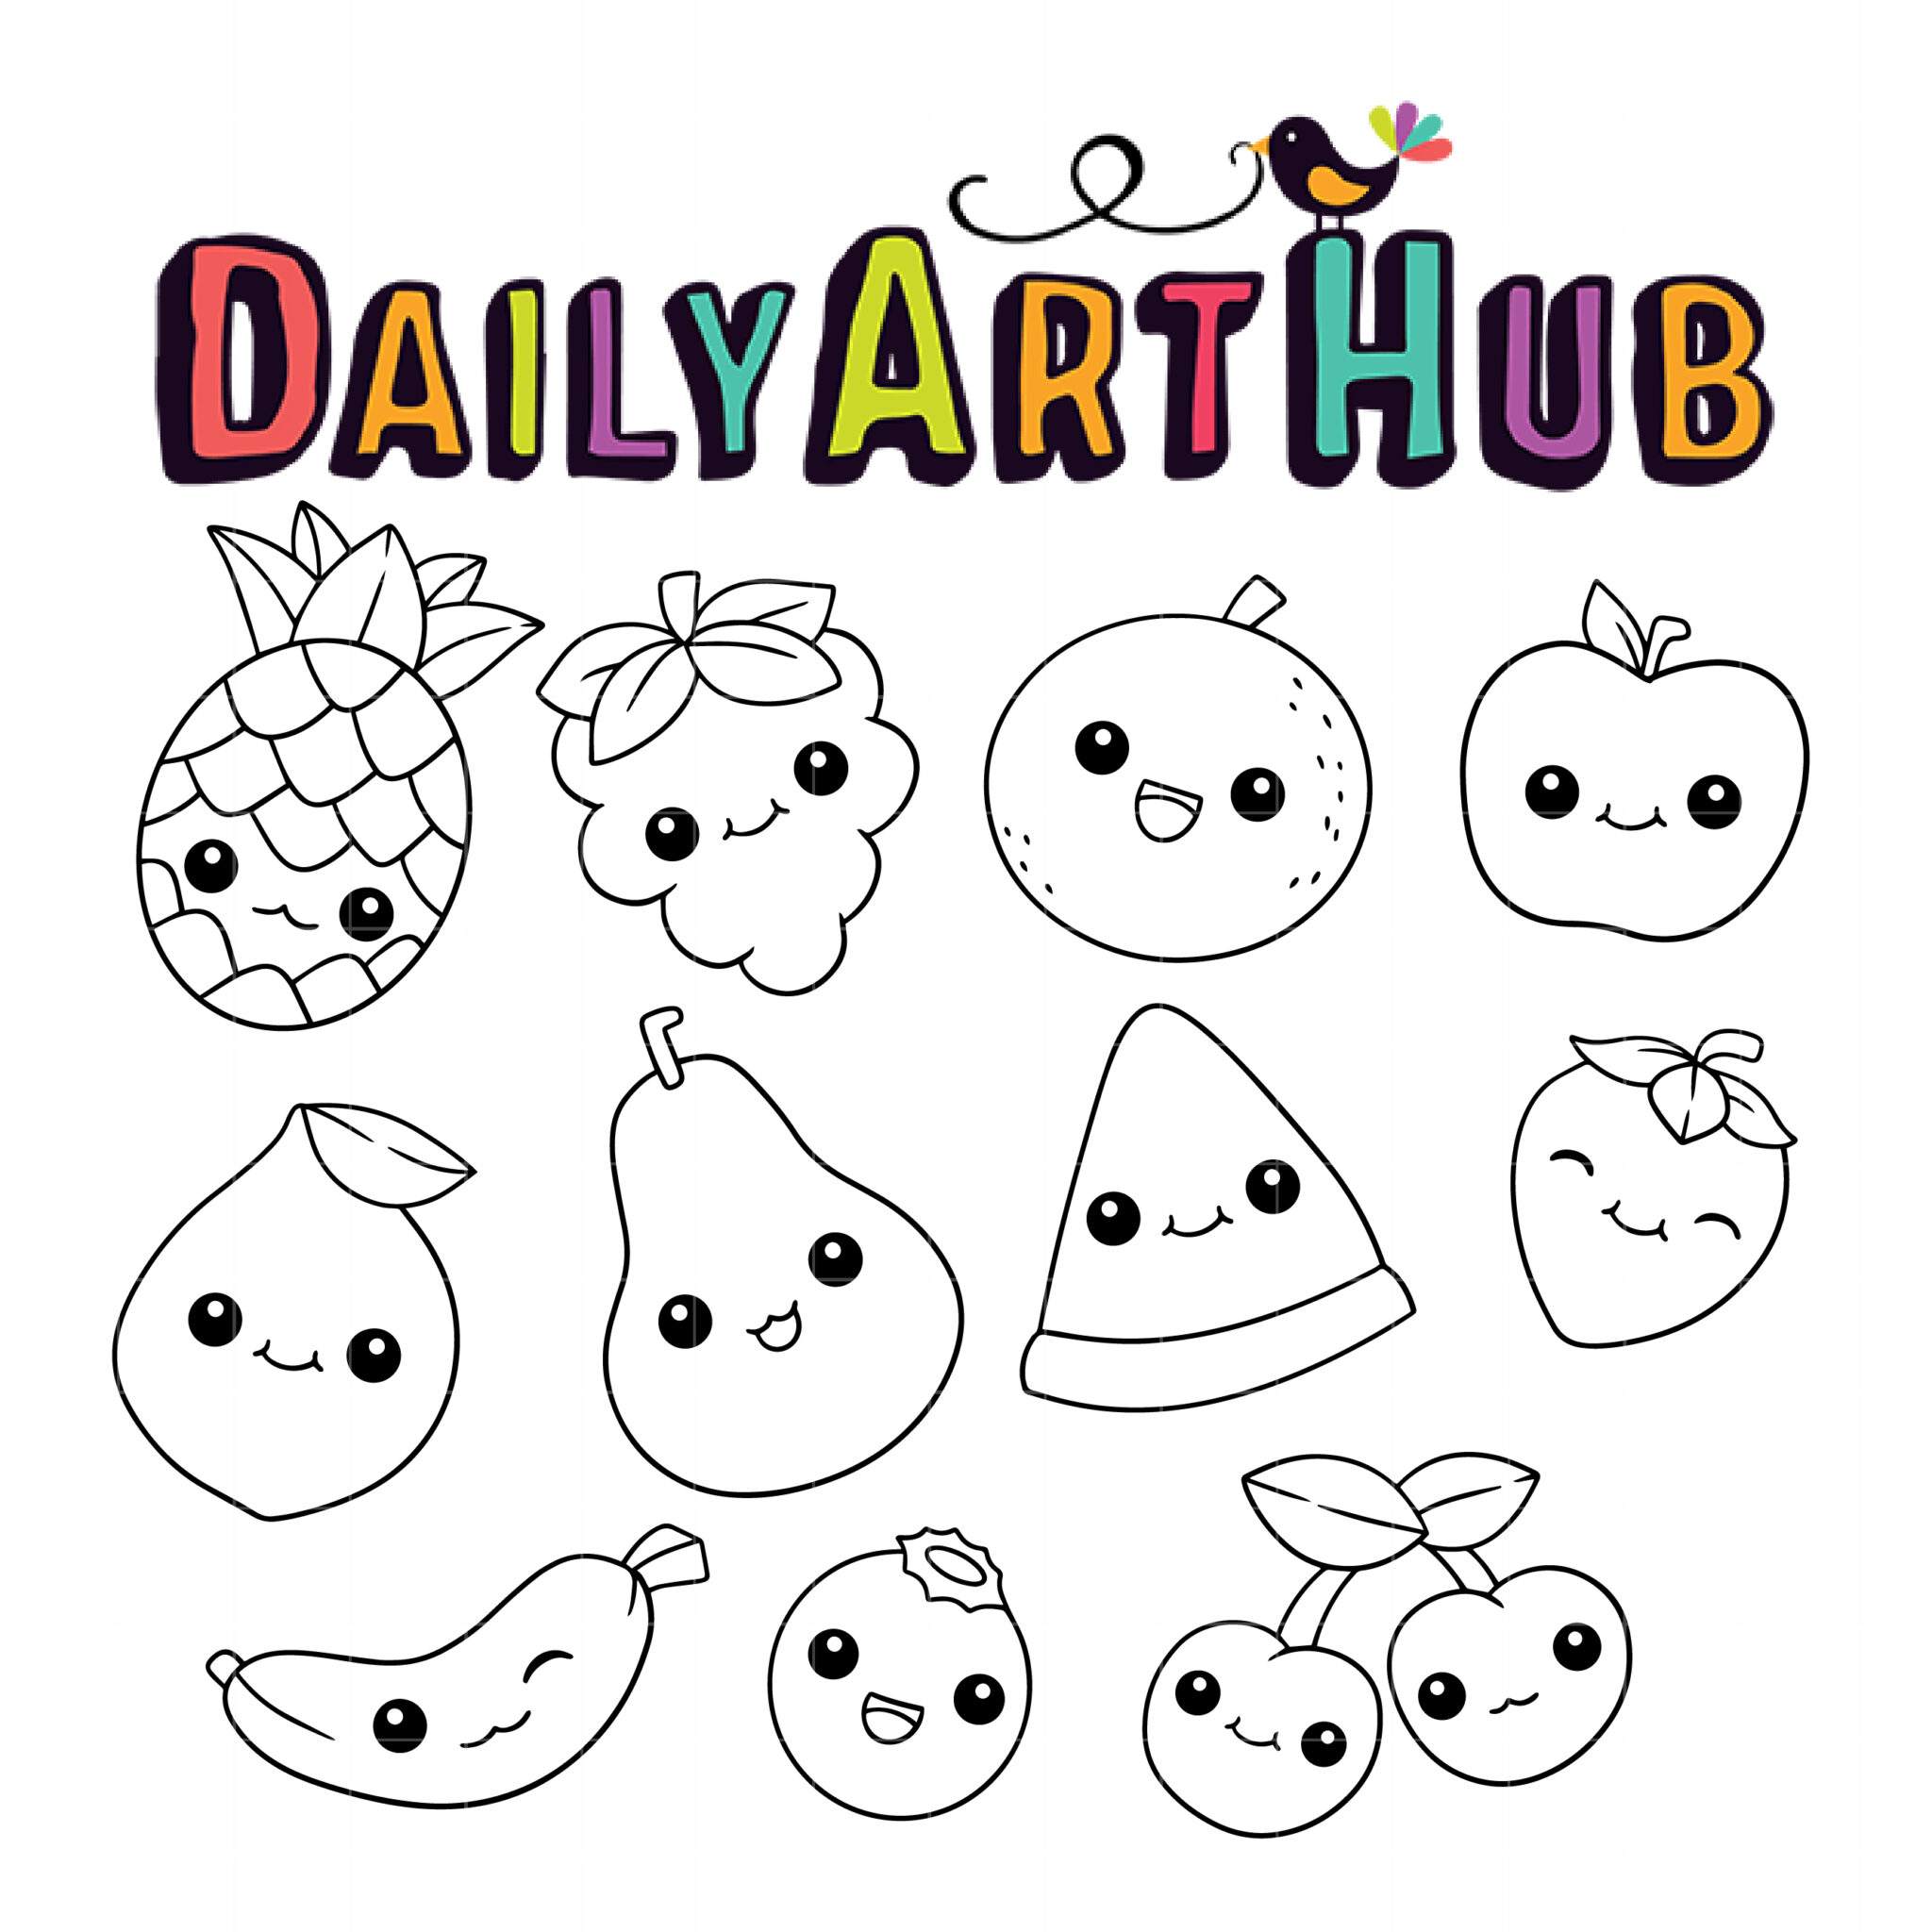 https://www.dailyarthub.com/wp-content/uploads/2022/07/Kawaii-Fruits-Outline-Drawing-scaled.jpg